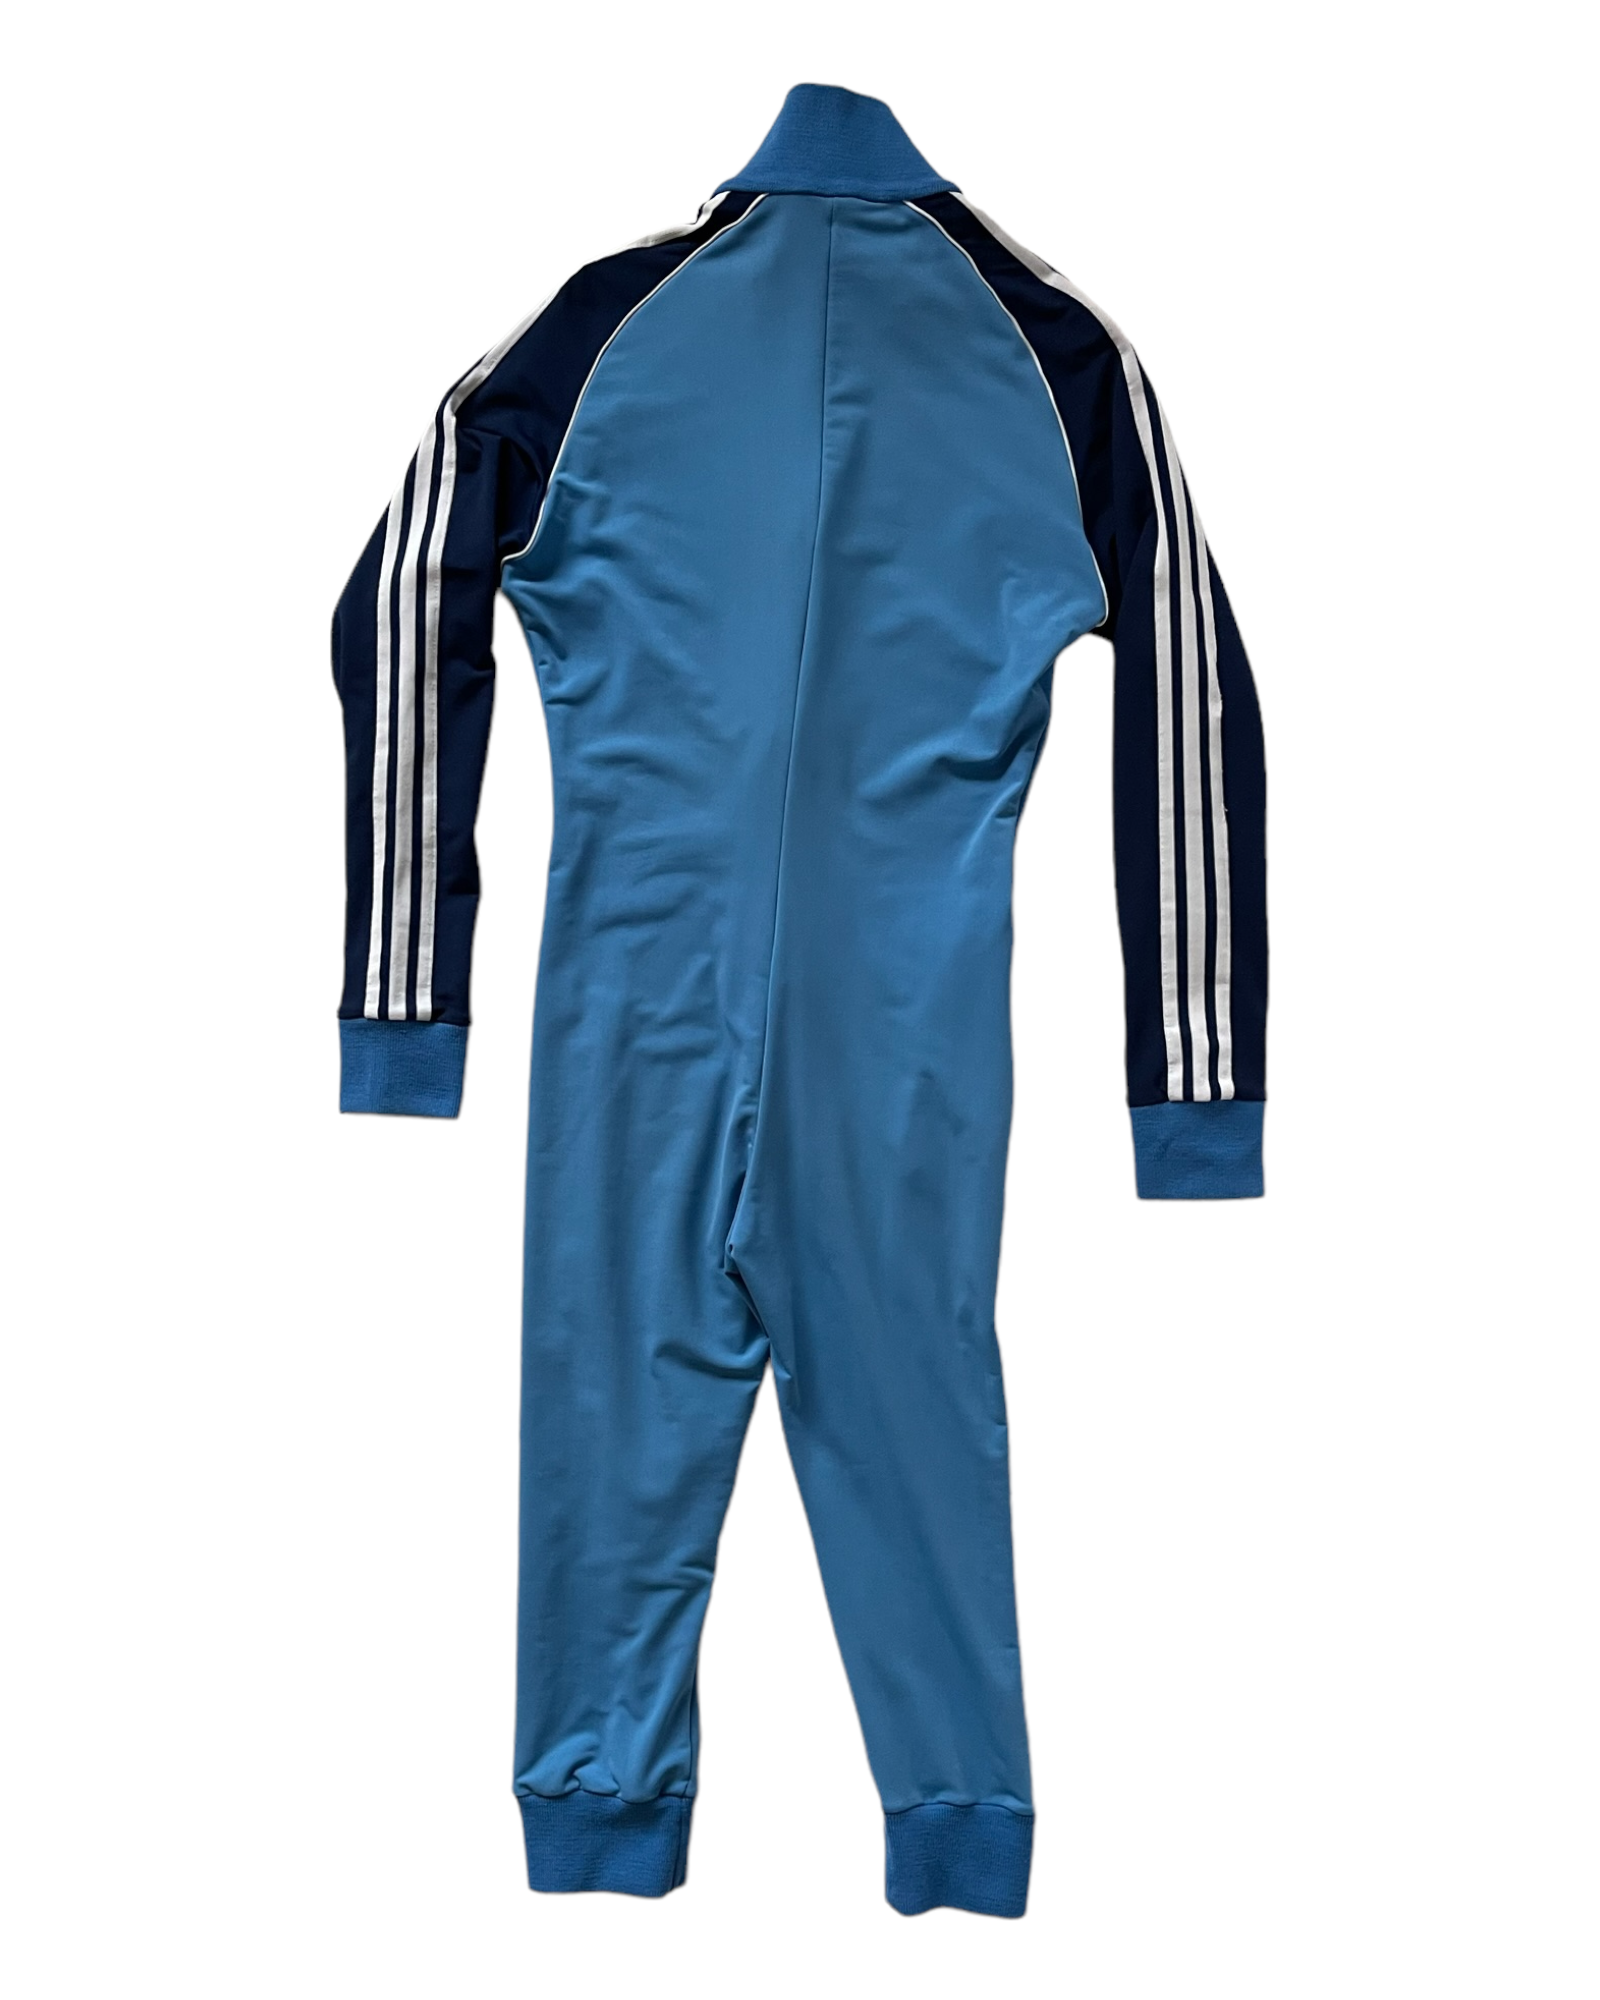 Vintage 70's Adidas Jumpsuit Overall Size S Blue